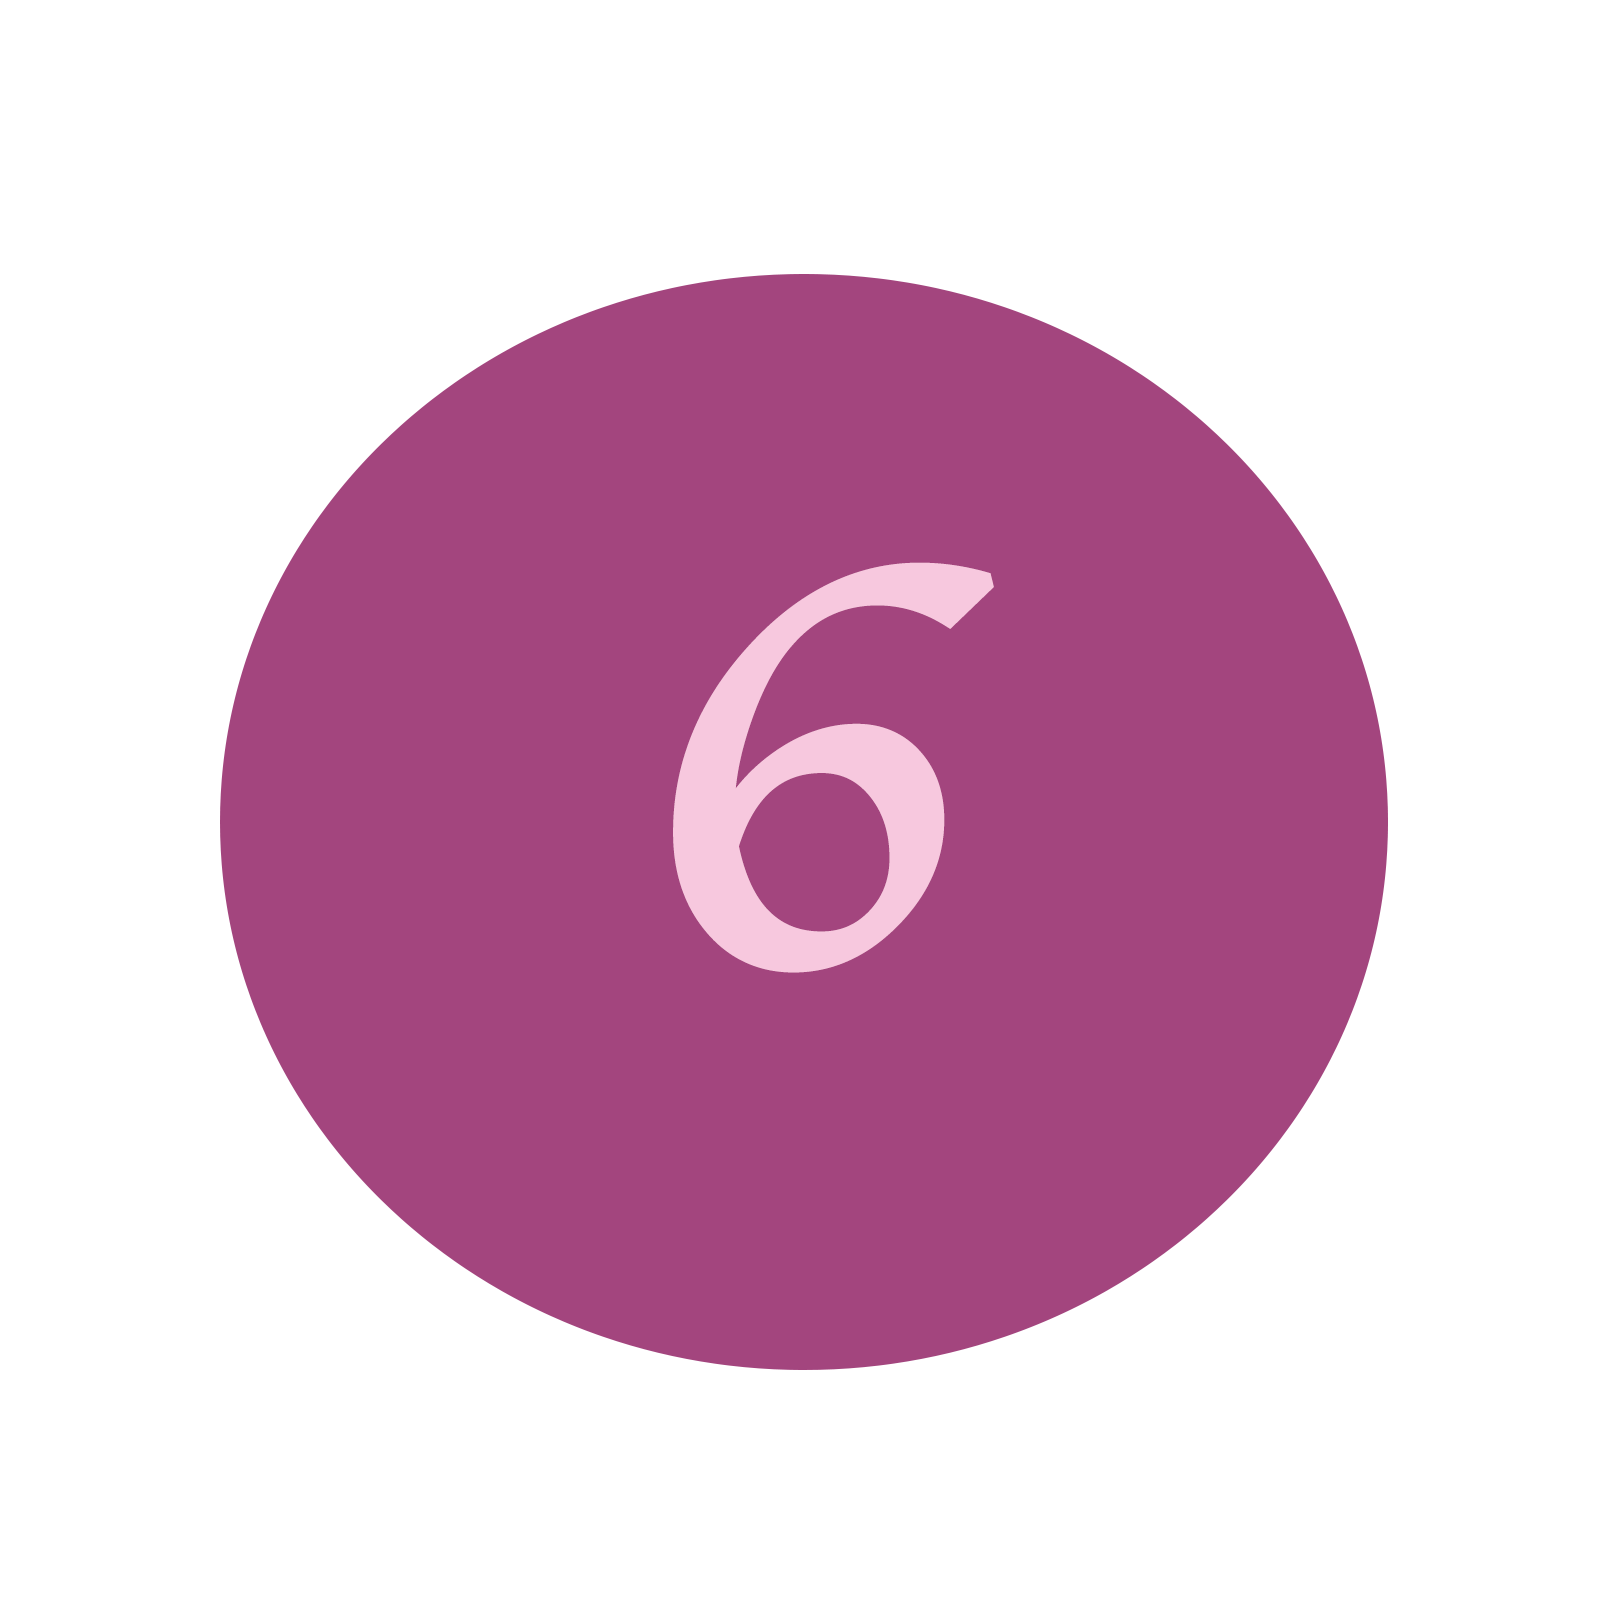 6 in numerology